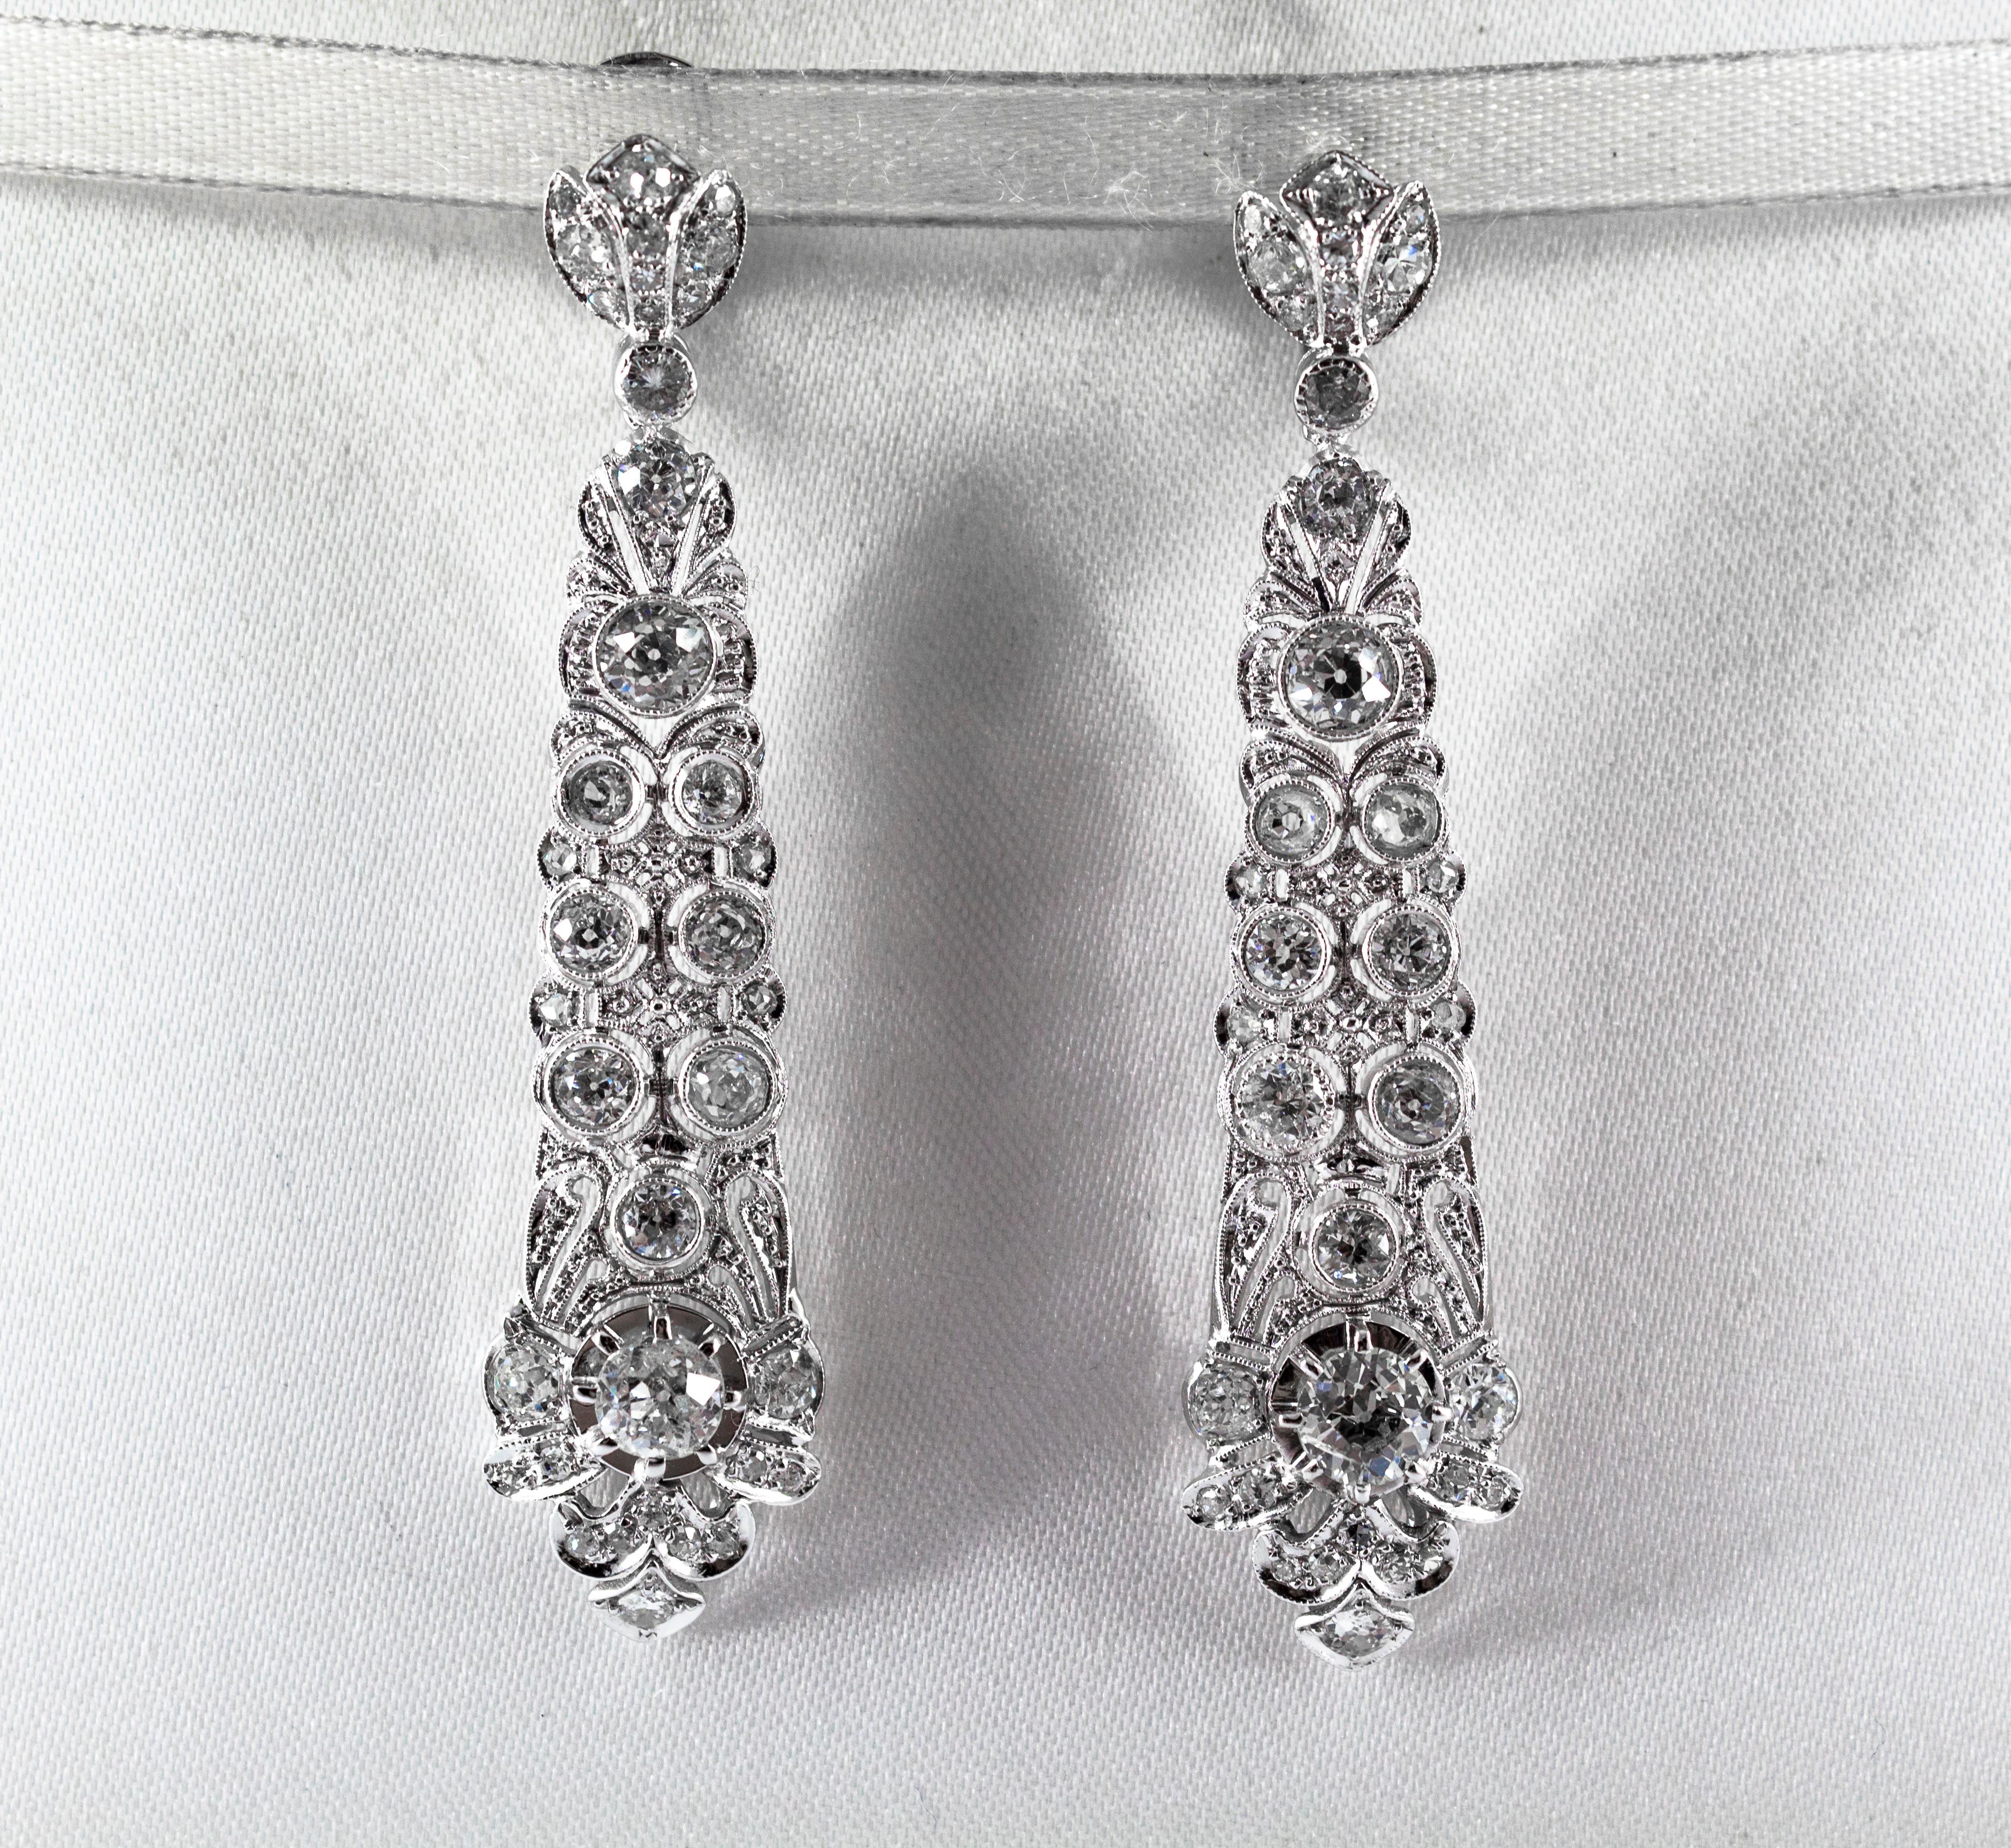 These Earrings are made of 18K White Gold.
These Earrings have 5.85 Carats of White Old European Cut Diamonds.
These Earrings are inspired by Renaissance Style.
All our Earrings have pins for pierced ears but we can change the closure and make any